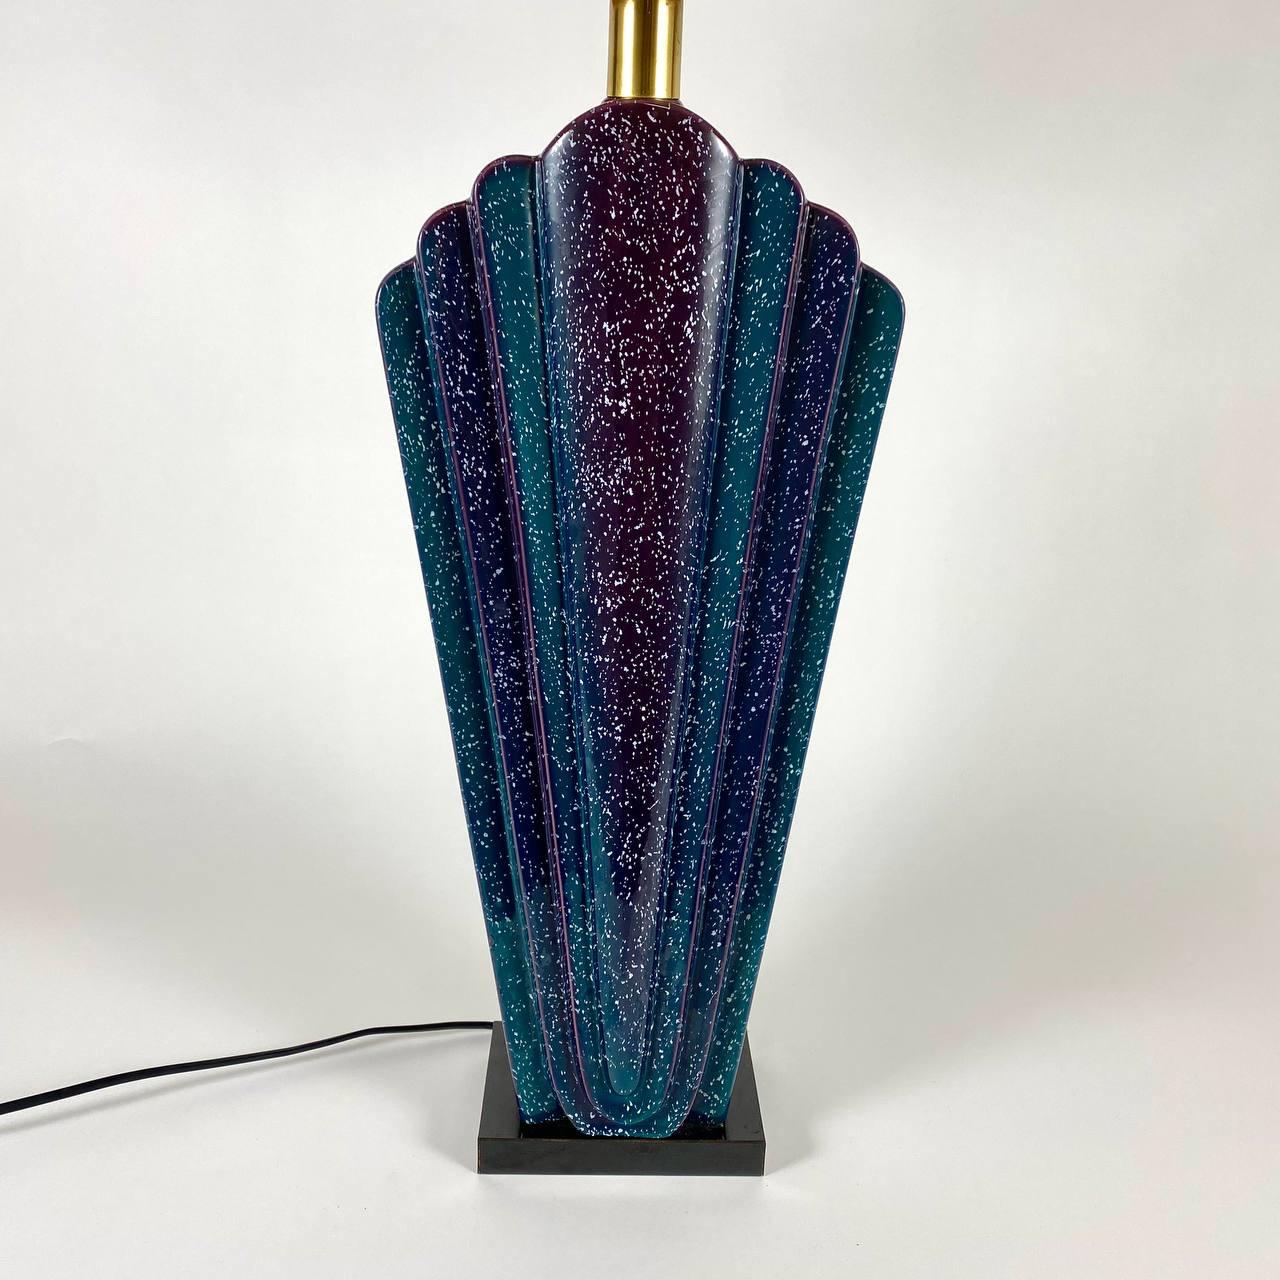 Large Italian Table Lamp 1960s Mid-Century Modern Blue Glass Lamp In Good Condition For Sale In Bastogne, BE